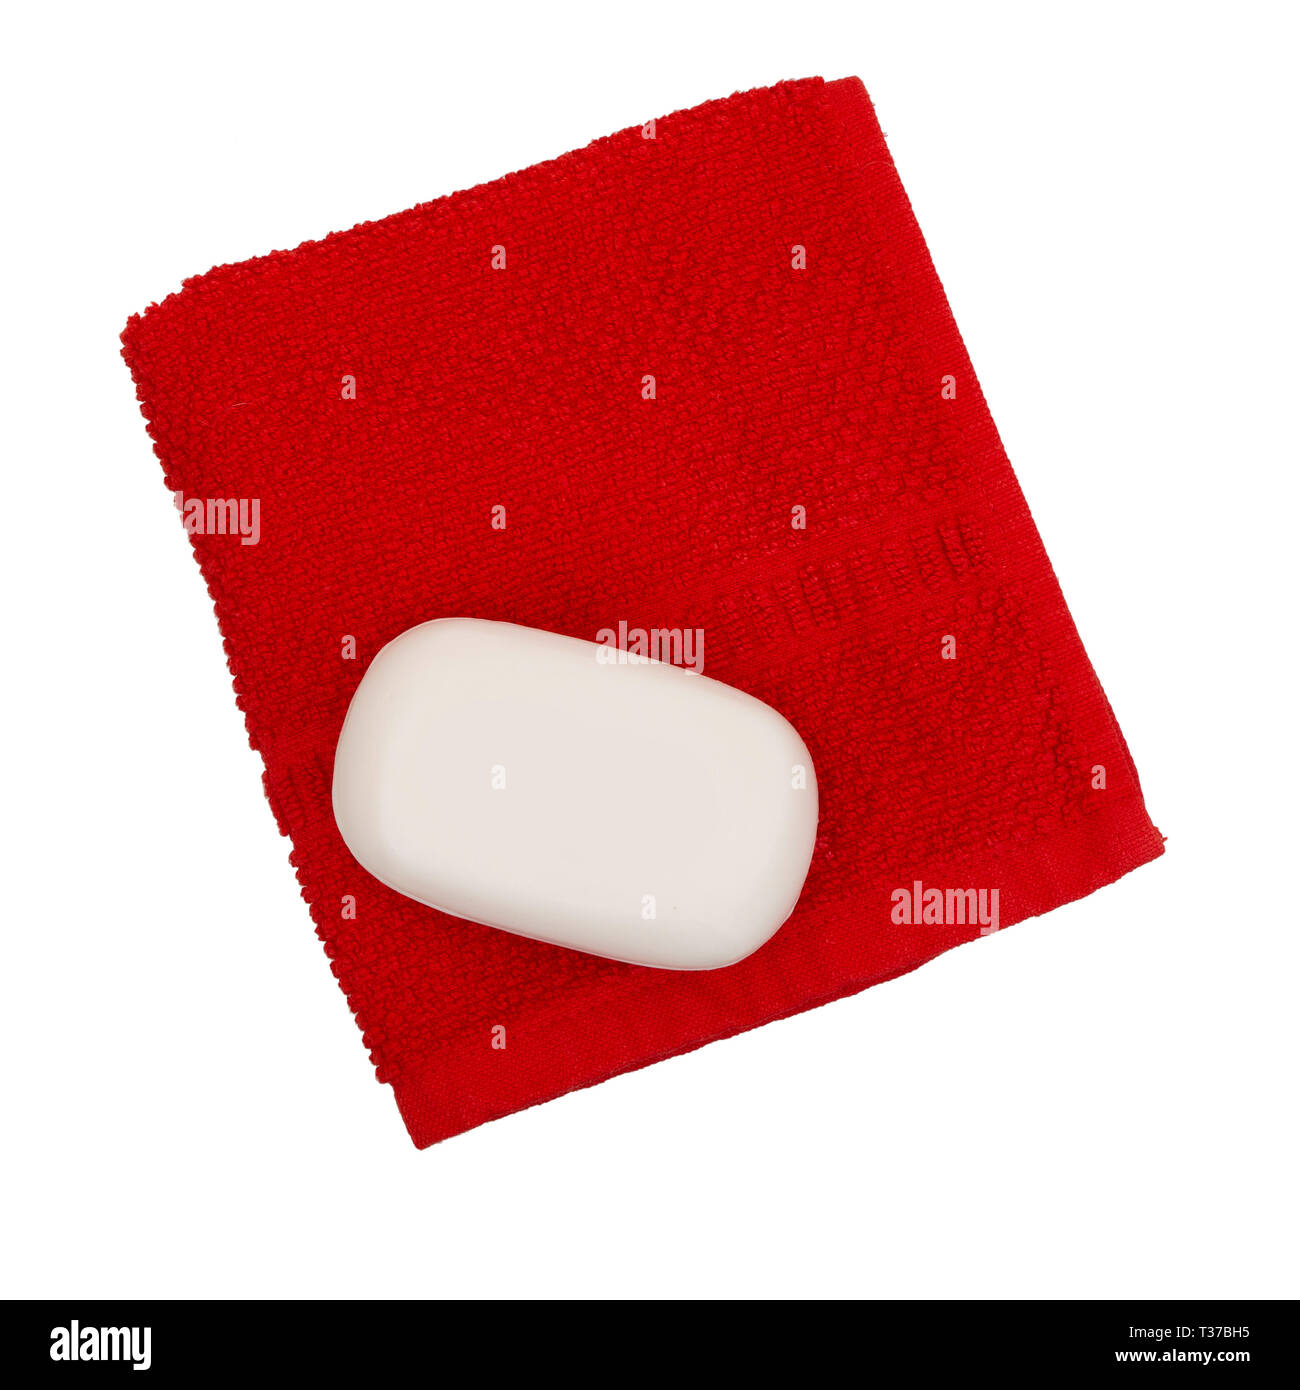 Simple white soap on red face flannel, facecloth, isolated on white background. Health, hygiene, environmentally friendly. Stock Photo